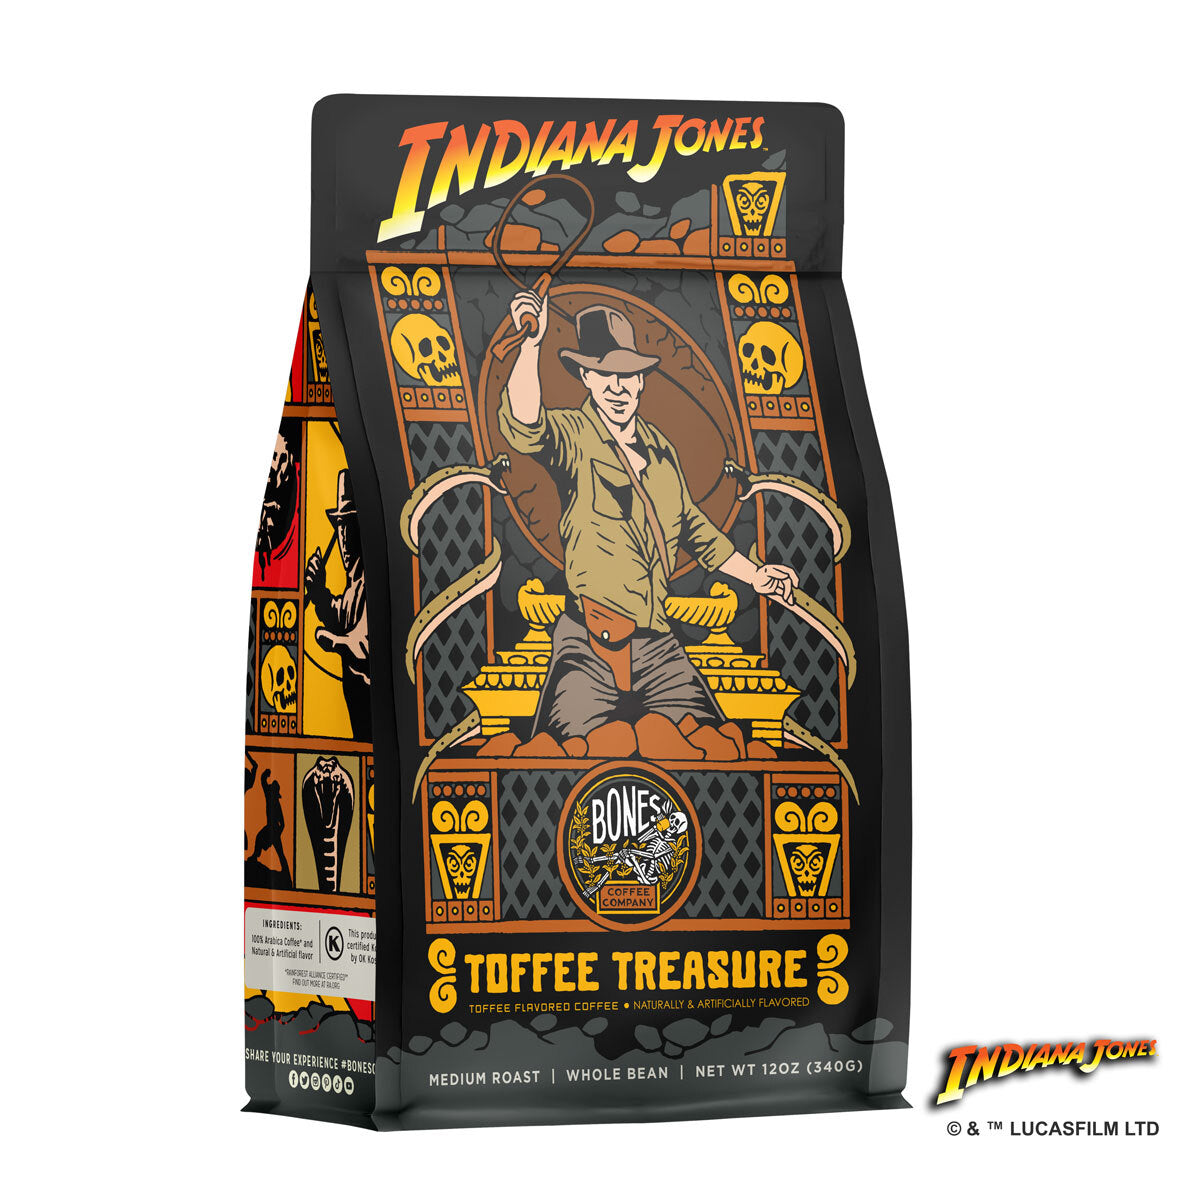 The front of a 12 ounce bag of Bones Coffee Company Toffee Treasure coffee inspired by Lucasfilm Indiana Jones. Its flavor is toffee and it has Indiana Jones cracking his whip on the art.